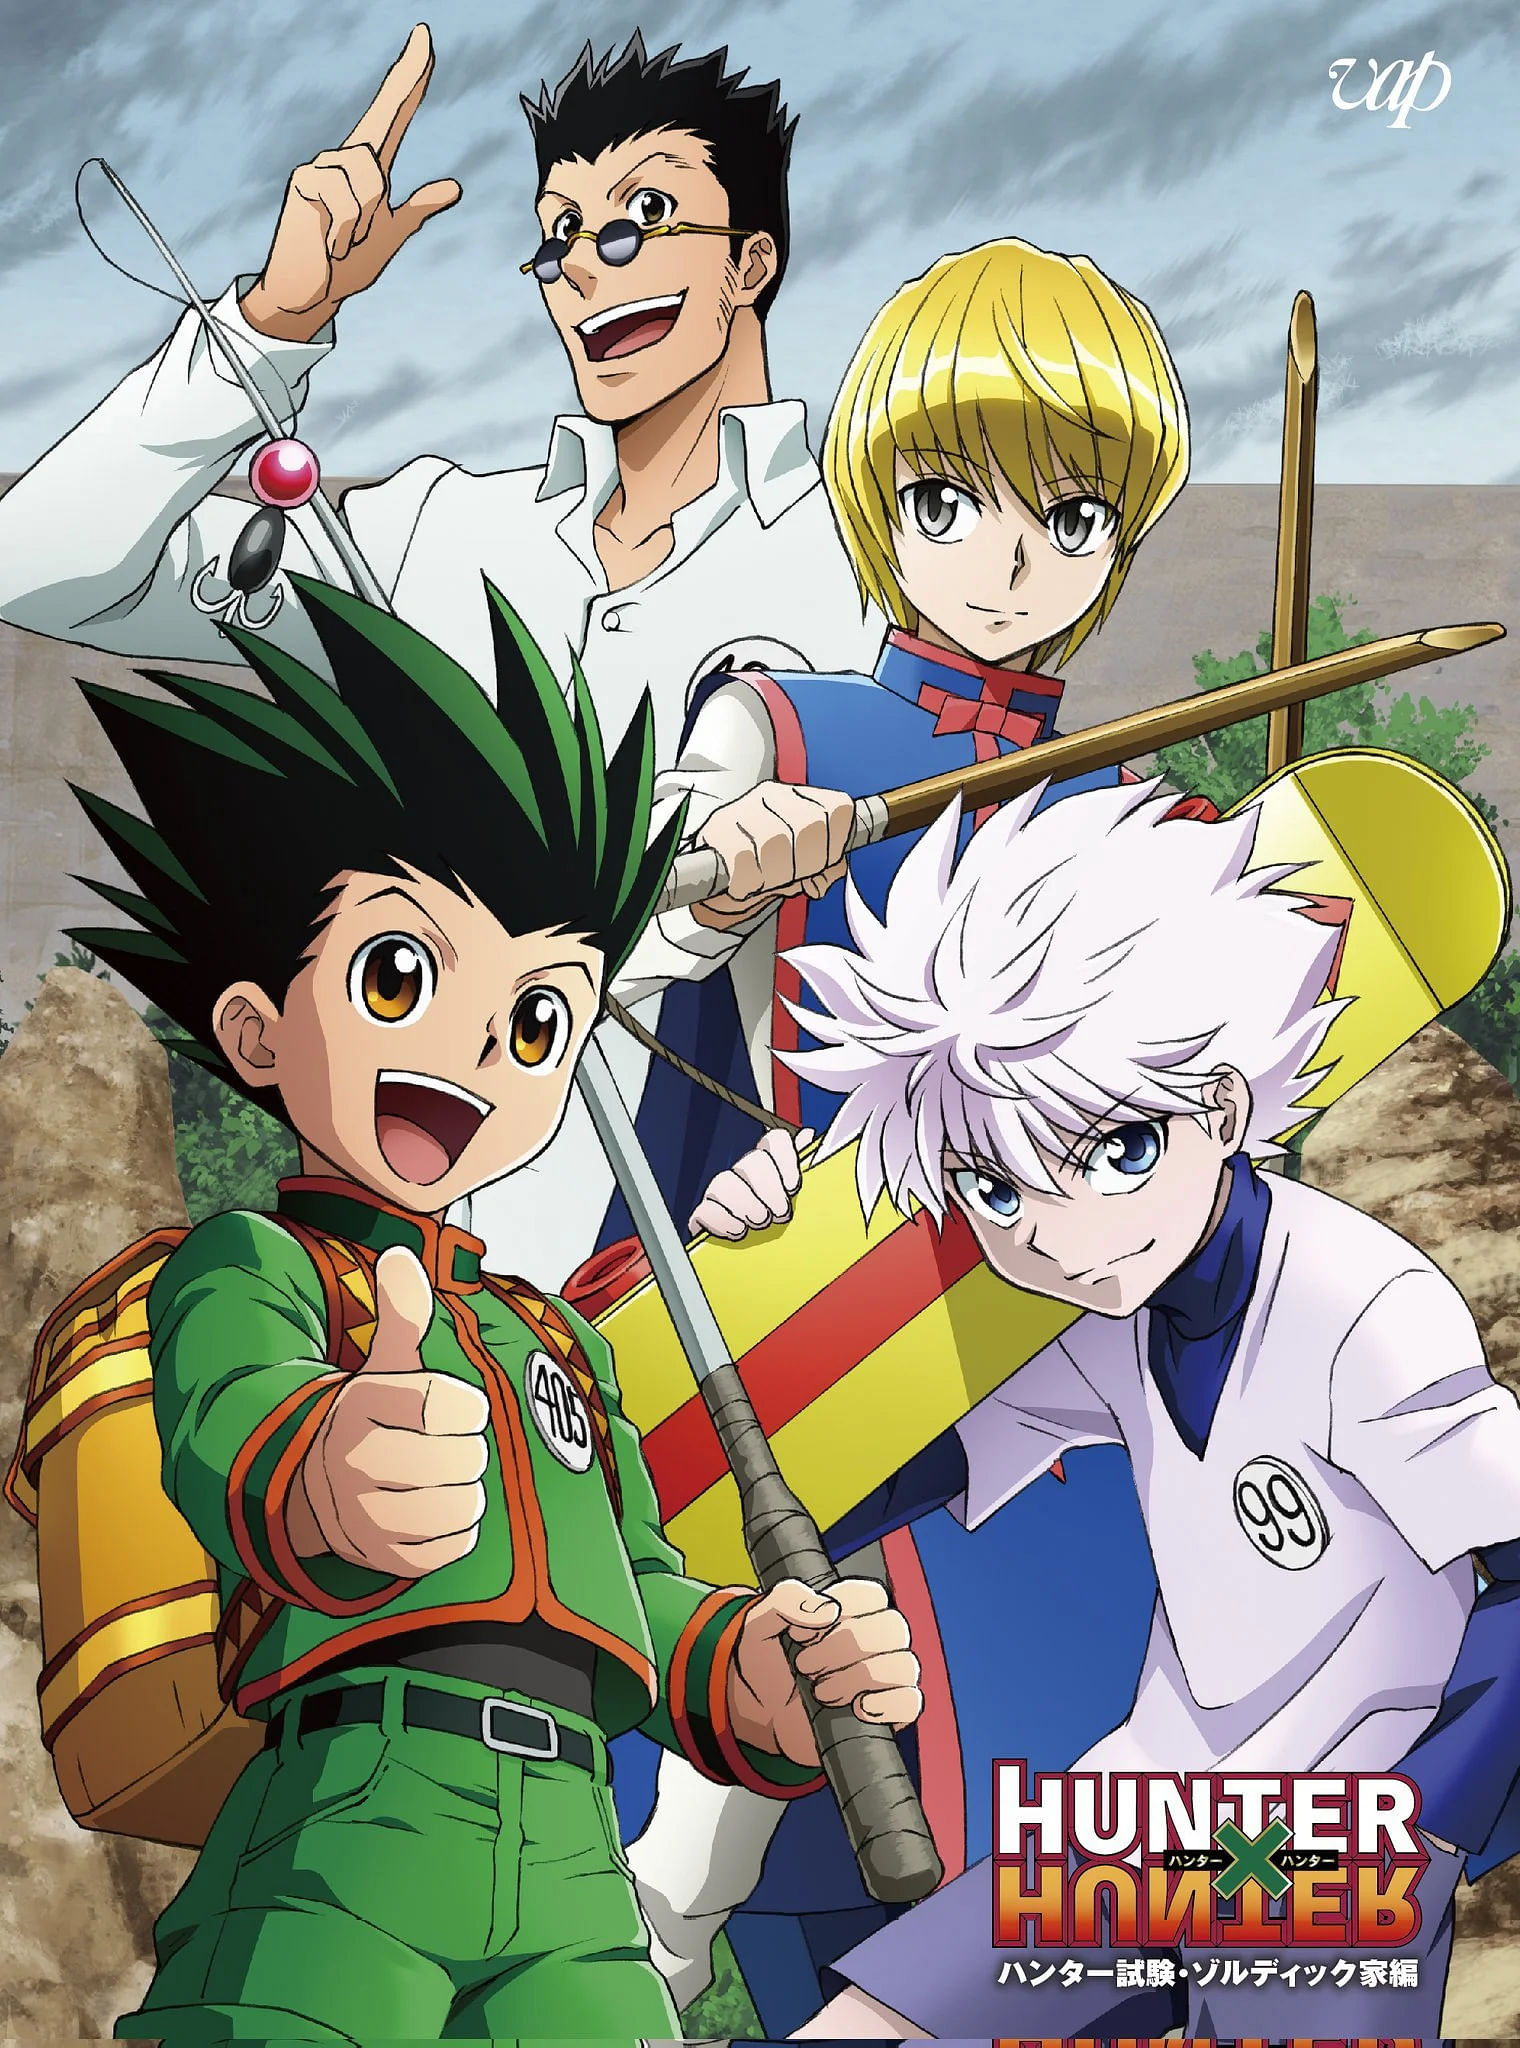 How did the Hunter x Hunter original anime finish if not even the